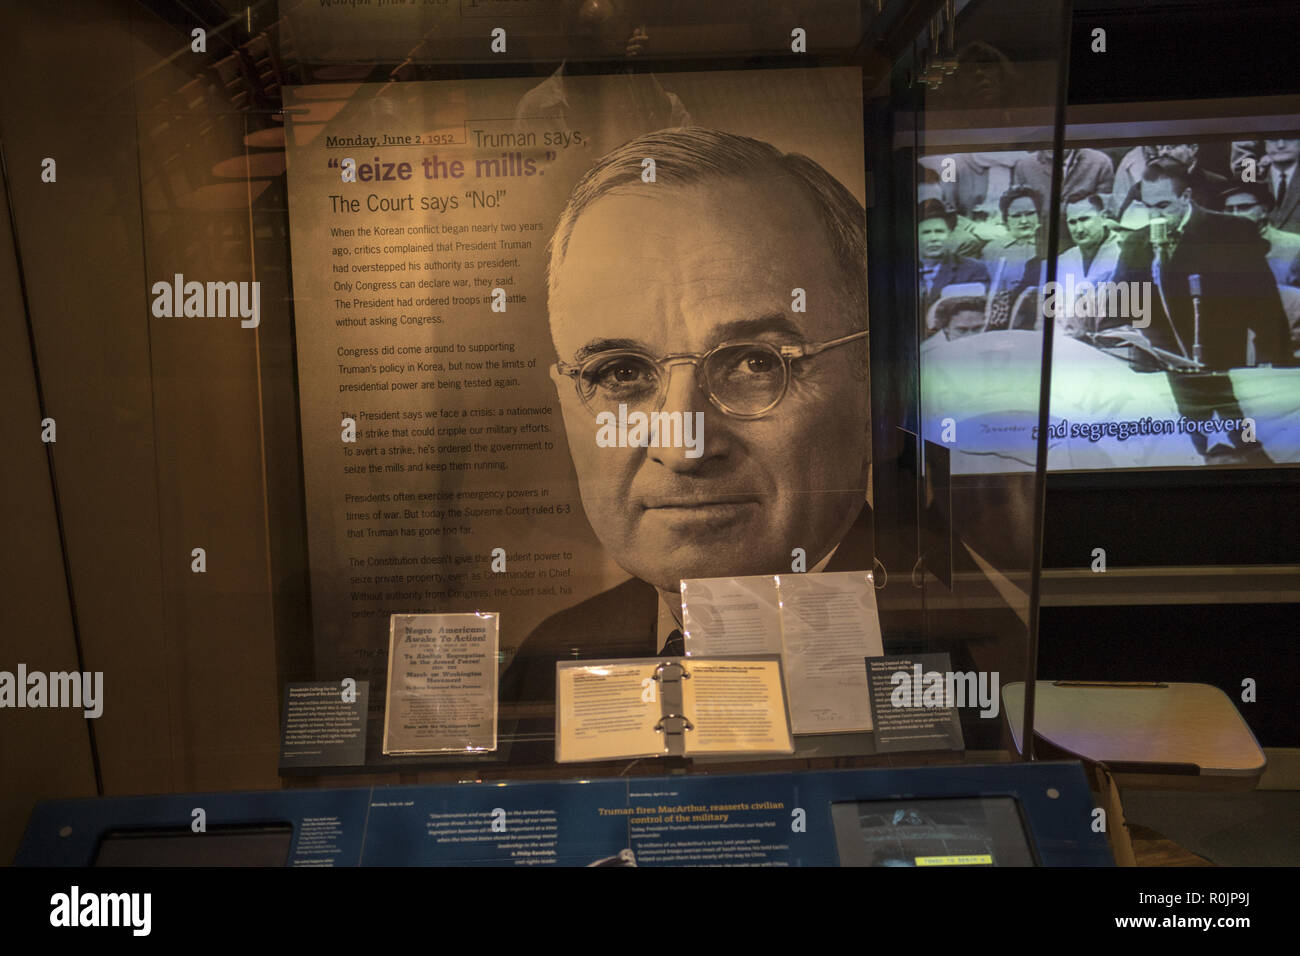 President Harry truman and his controversial action concerning Korea is explained in a display at the National Constitrution Center Museum in Philadelphia, Pennsylvania. Stock Photo